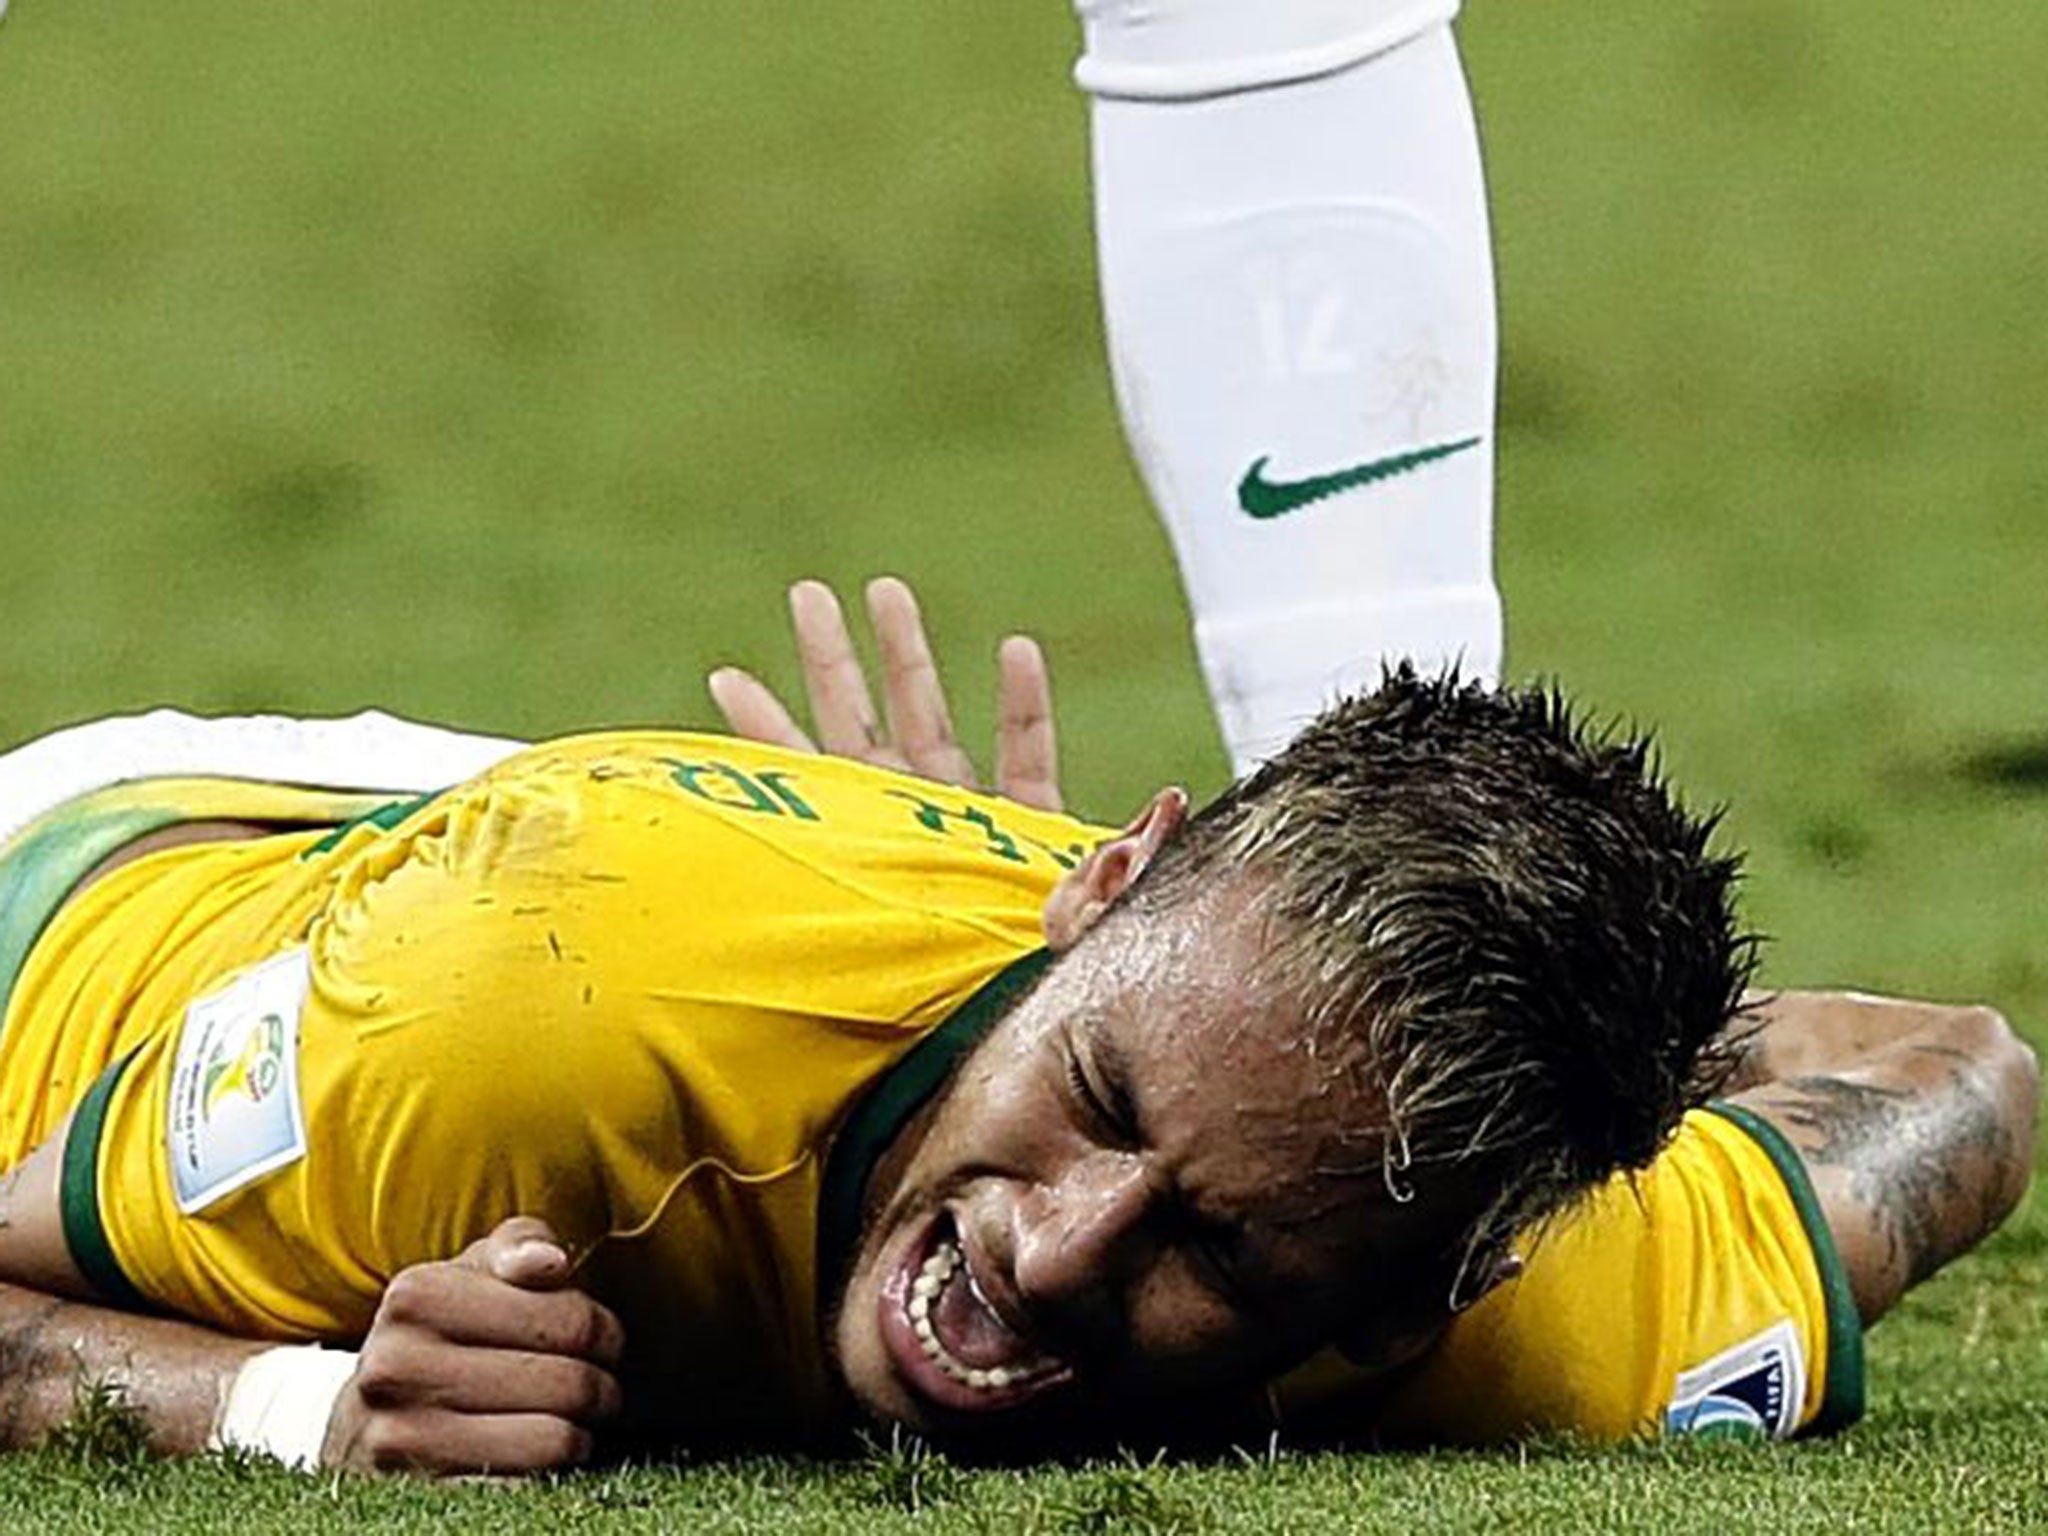 Agony: Neymar feels the pain of the challenge that put him out of the World Cup